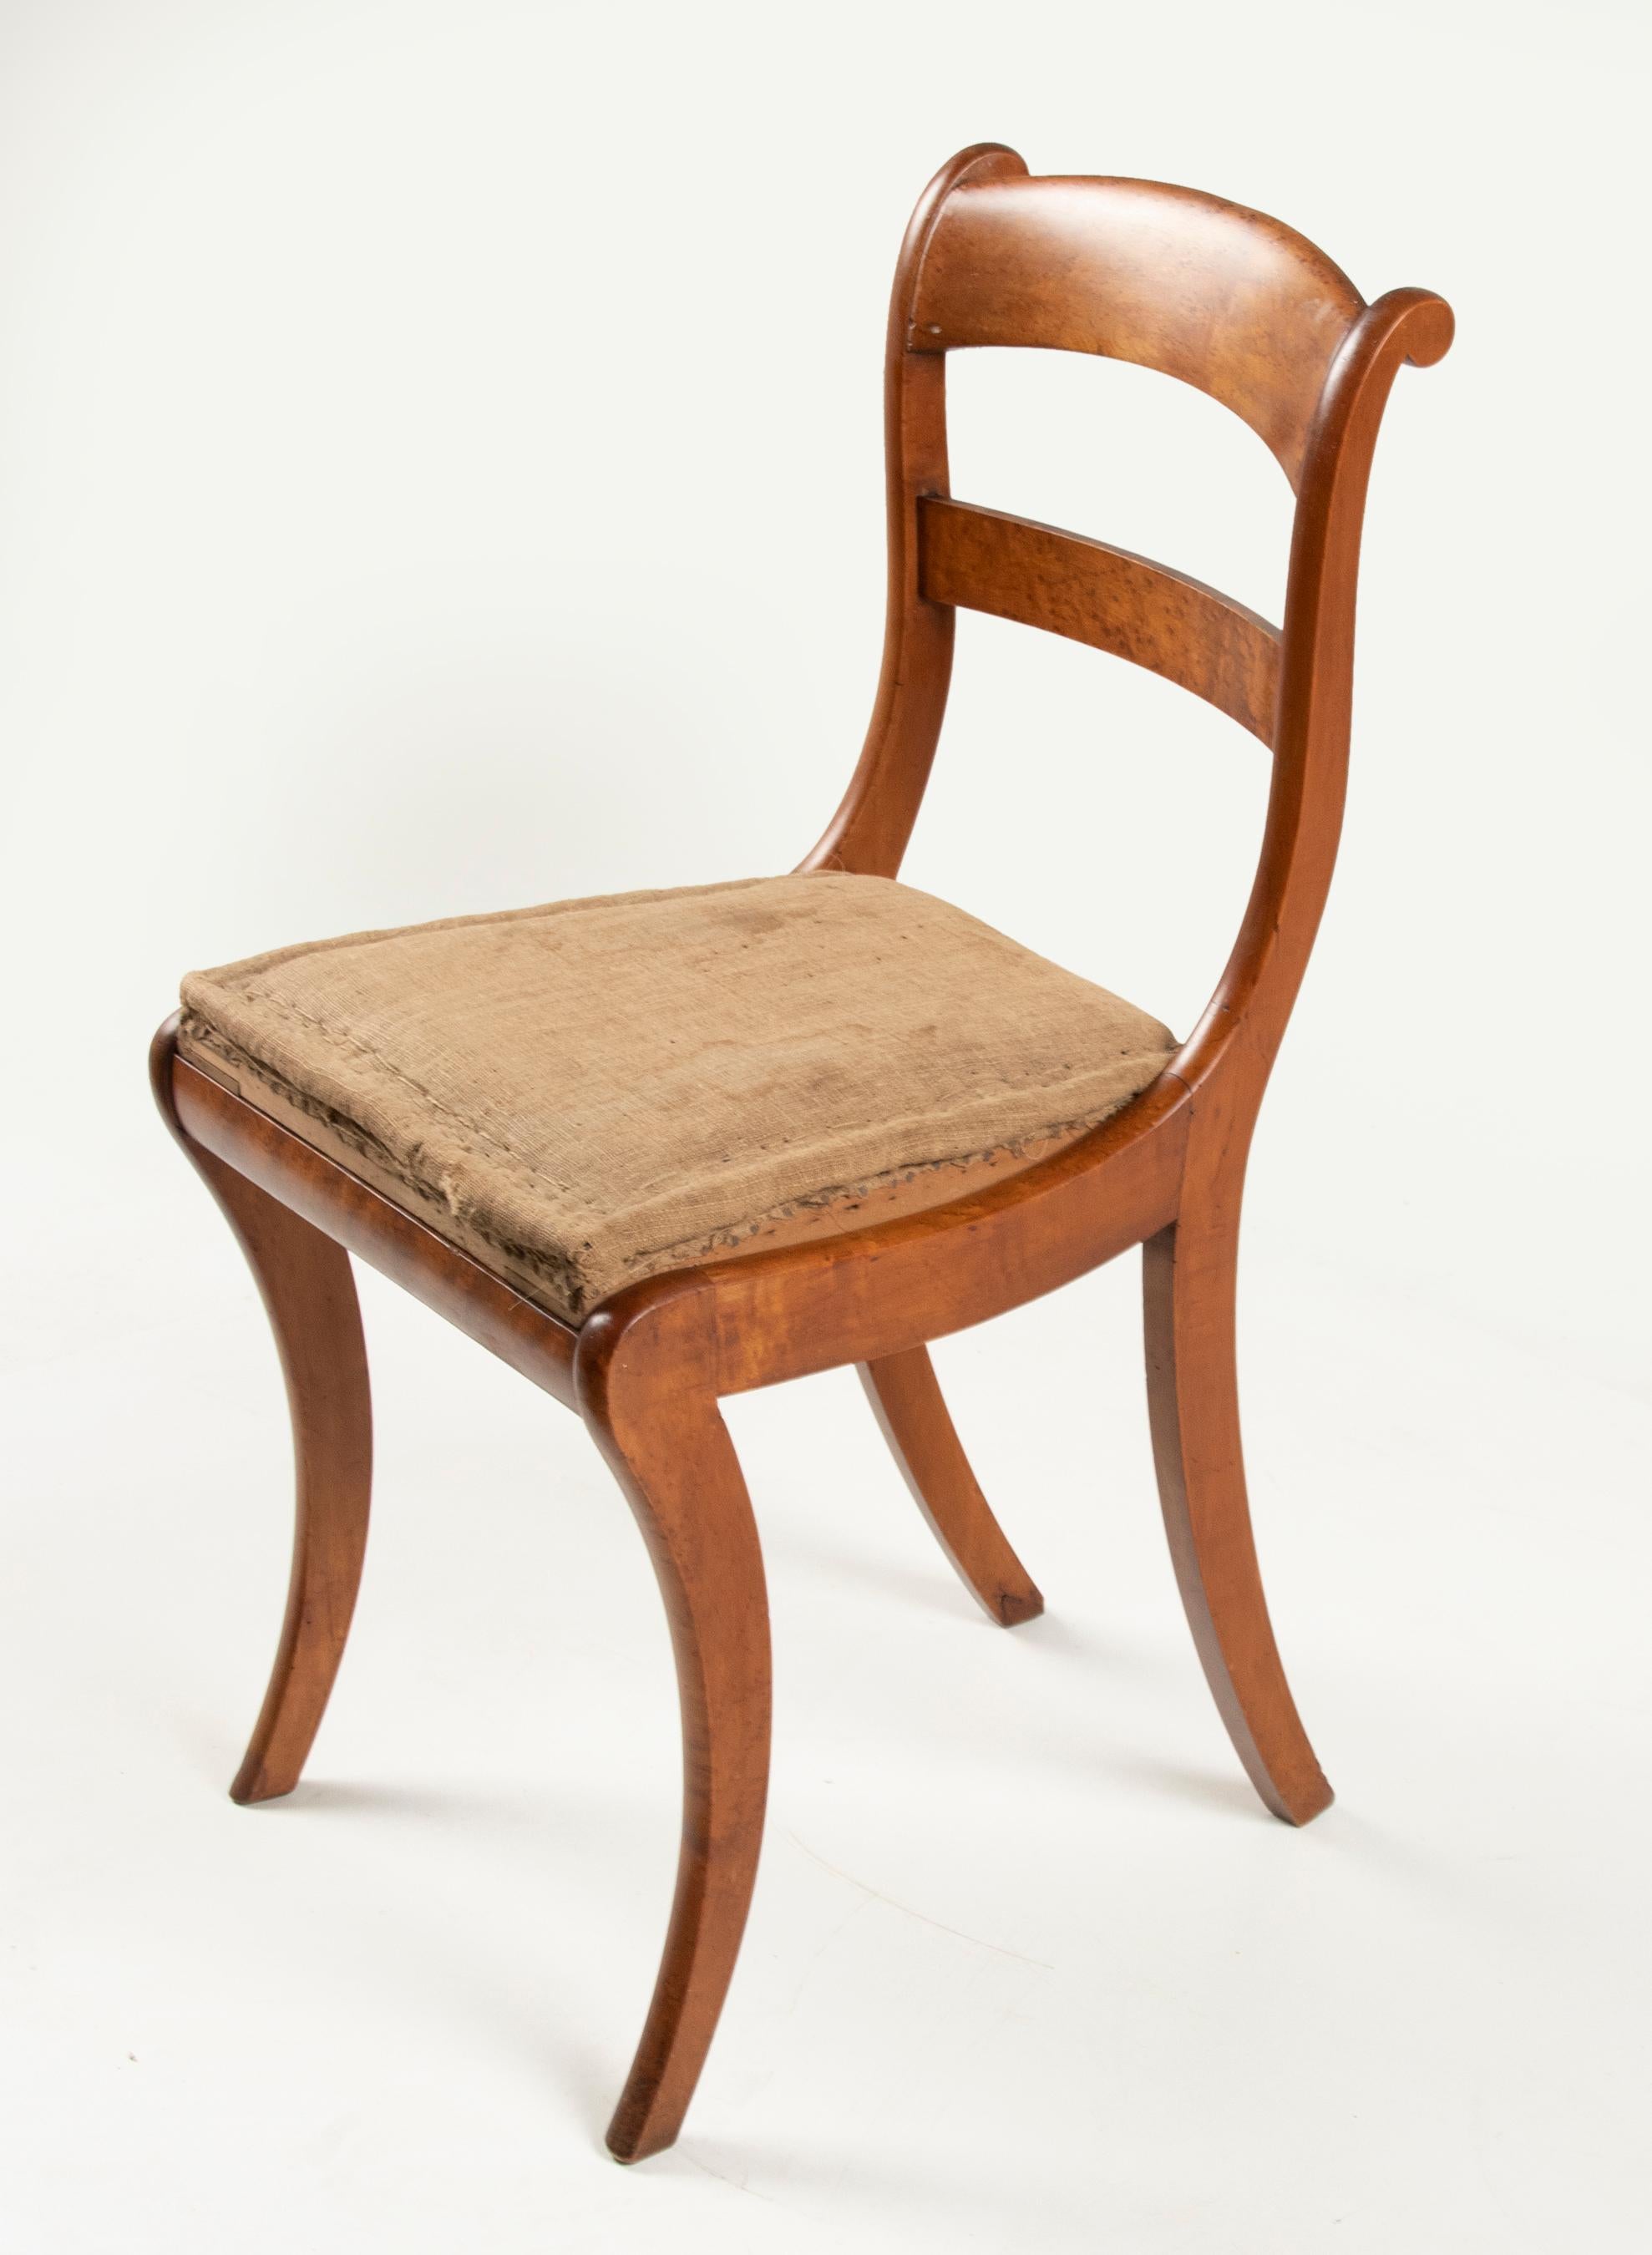 Early 19th Century Charles X Birds-Eye Maple Wood Dining Chairs In Good Condition For Sale In Casteren, Noord-Brabant